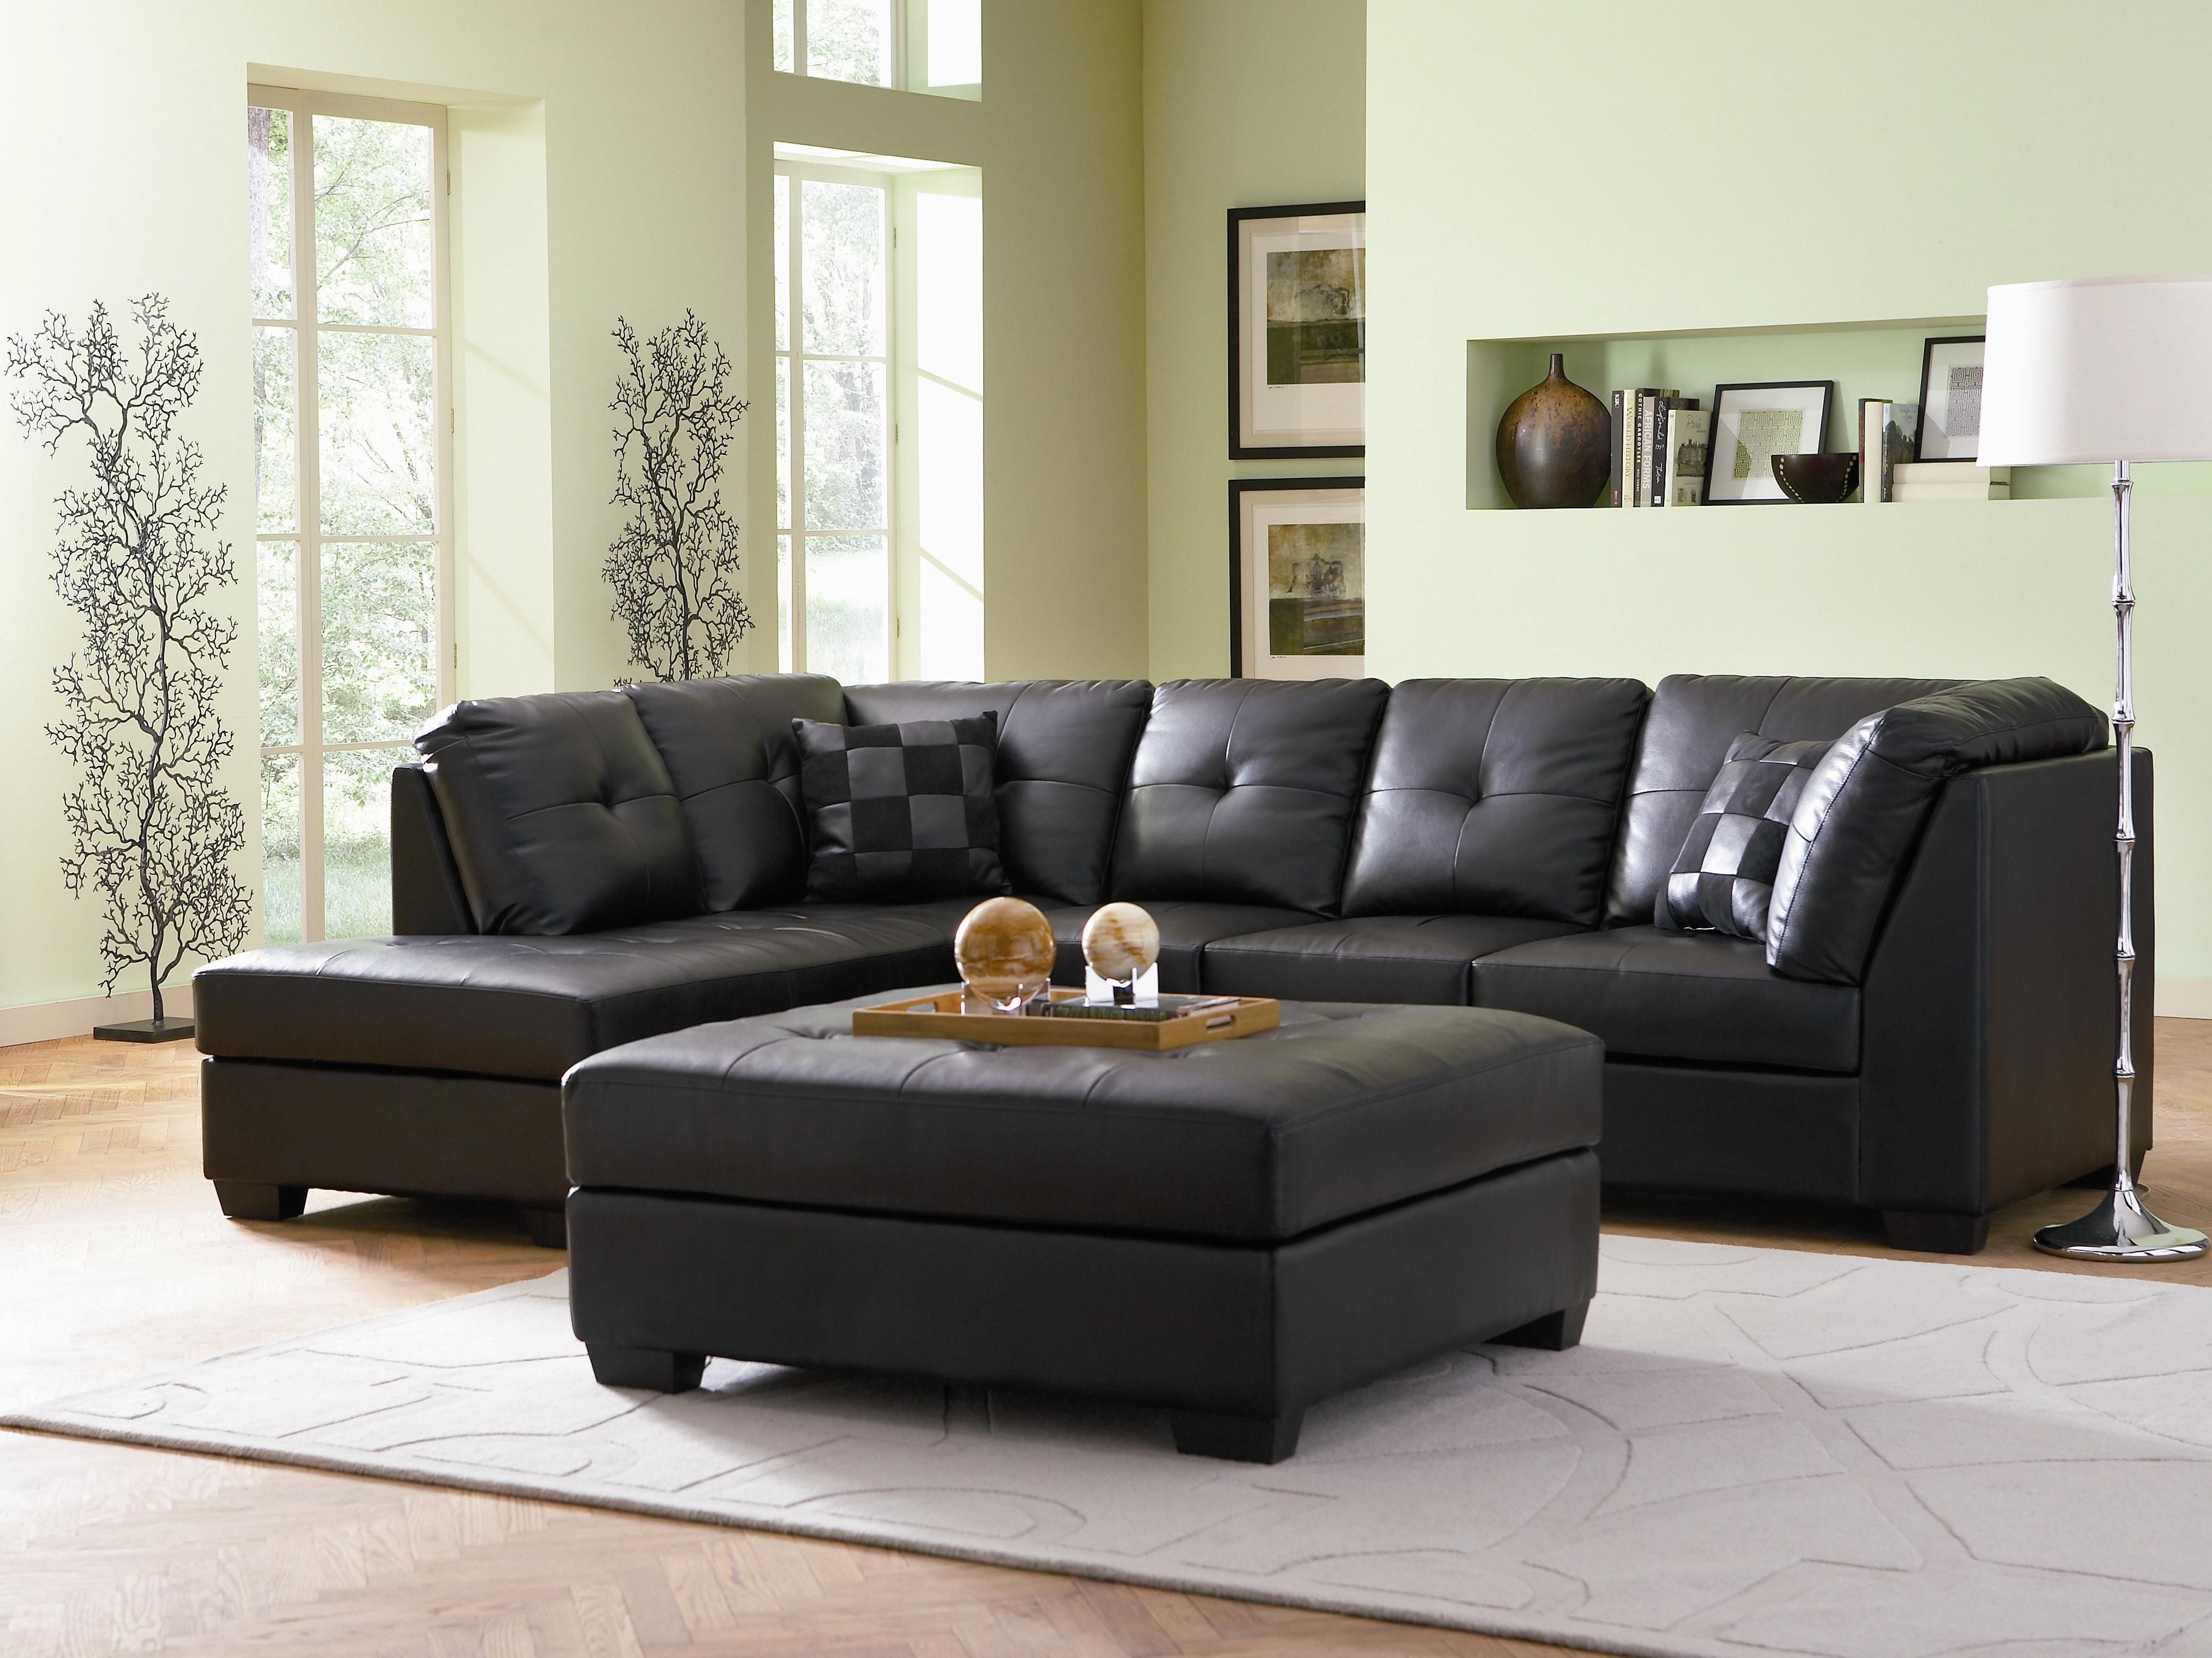 Coaster Darie Leather Sectional Sofa With Left Side Chaise For Black Sectional Sofa For Cheap (View 11 of 15)